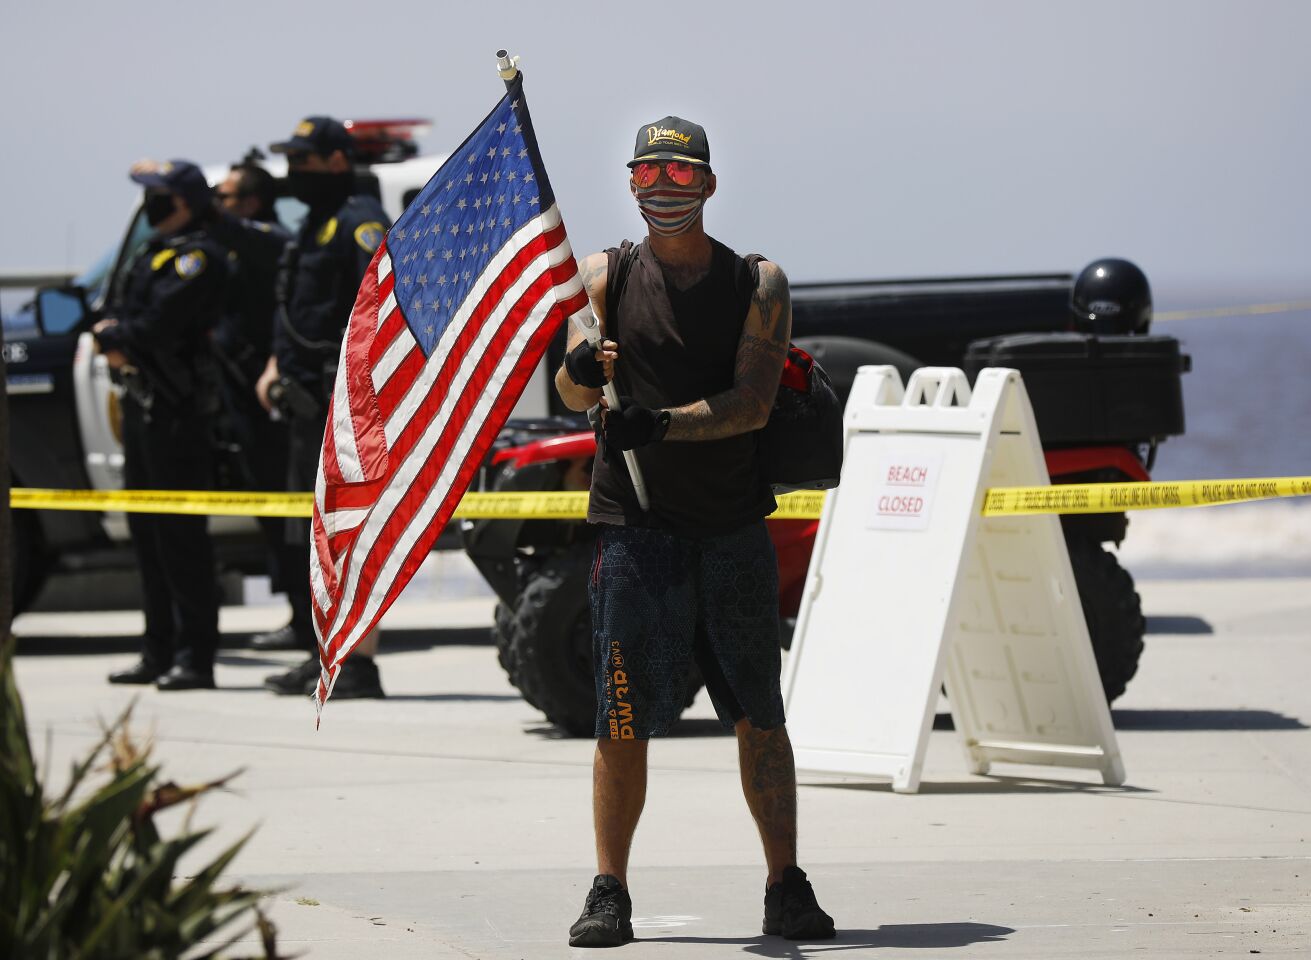 A protester stands on the boardwalk during A Day of Liberty rally in Pacific Beach on Sunday, April 26, 2020. The protesters were against the government shutdown due to the coronavirus.